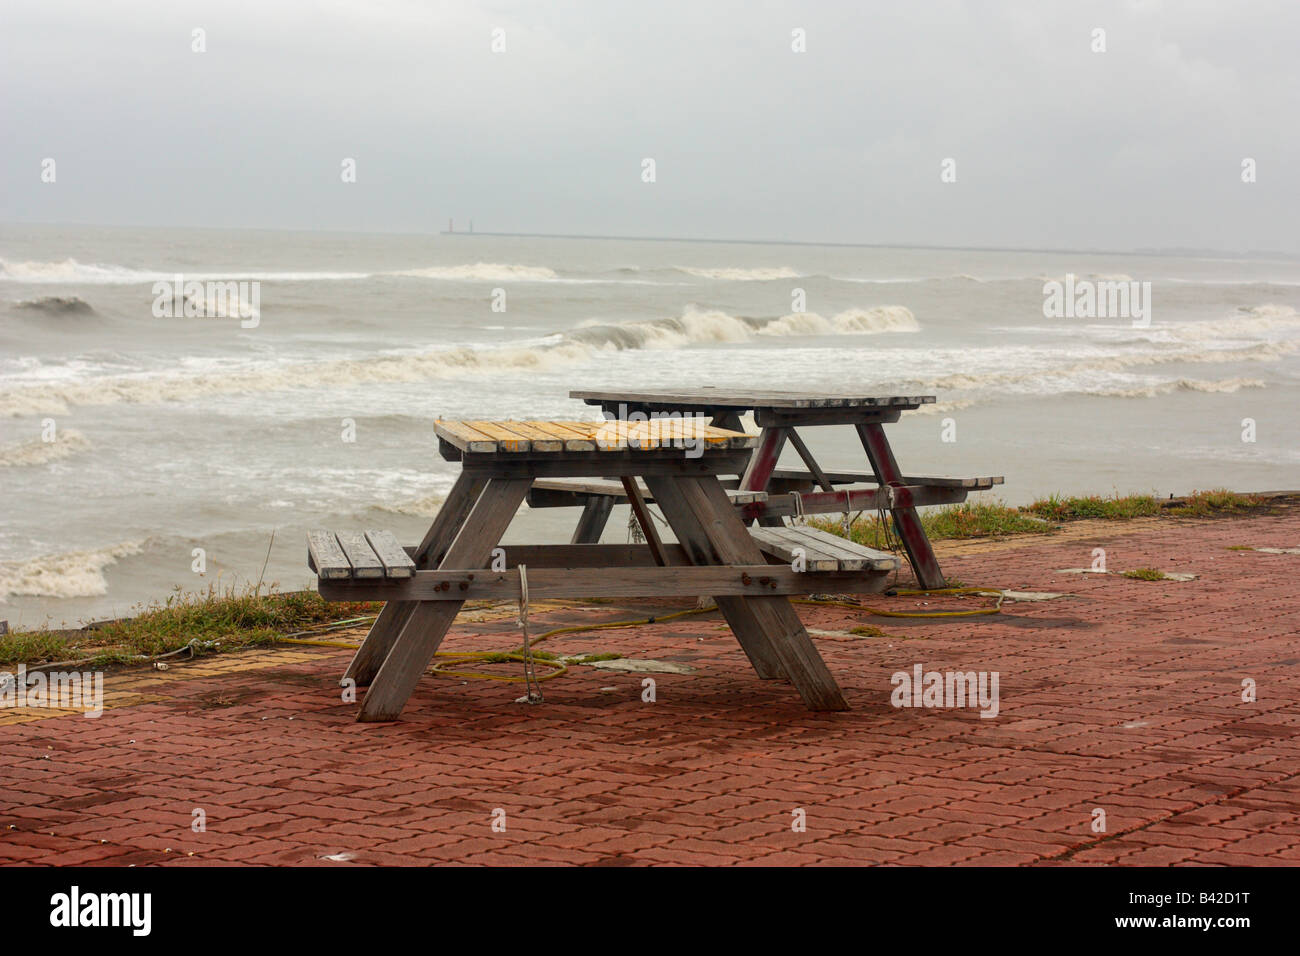 Picnic tables at a deserted beach eating area near Tainan, Taiwan Stock Photo